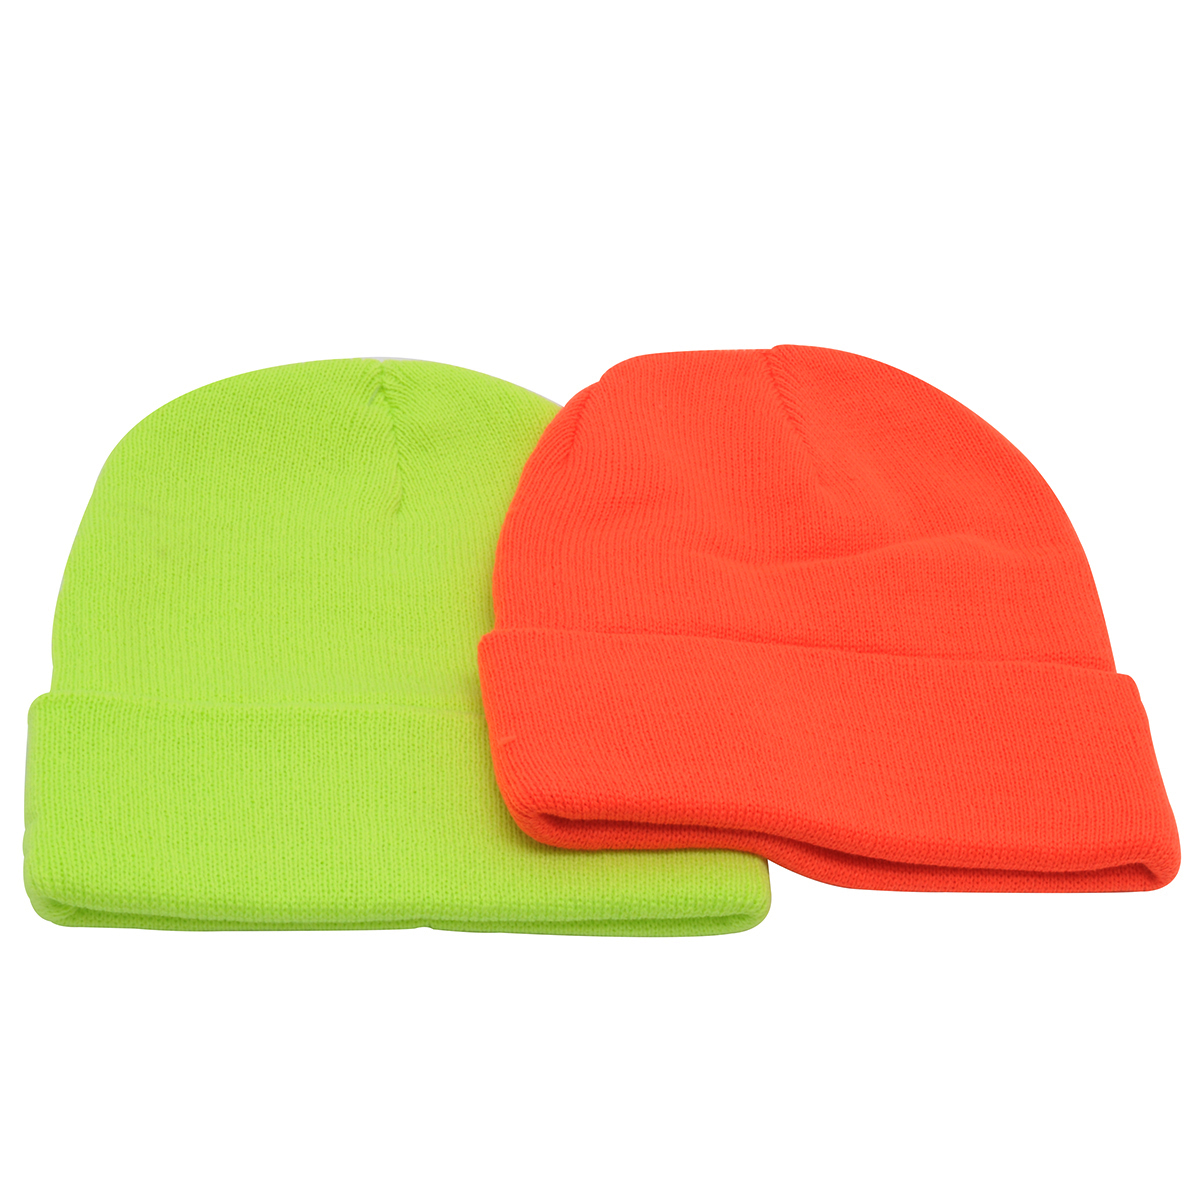 BlackCanyon Outfitters BCOKHHVL4 Cuffed High Visibility Poly Blend Knit Hat Bright Beanie Cap Assorted Neon Colors